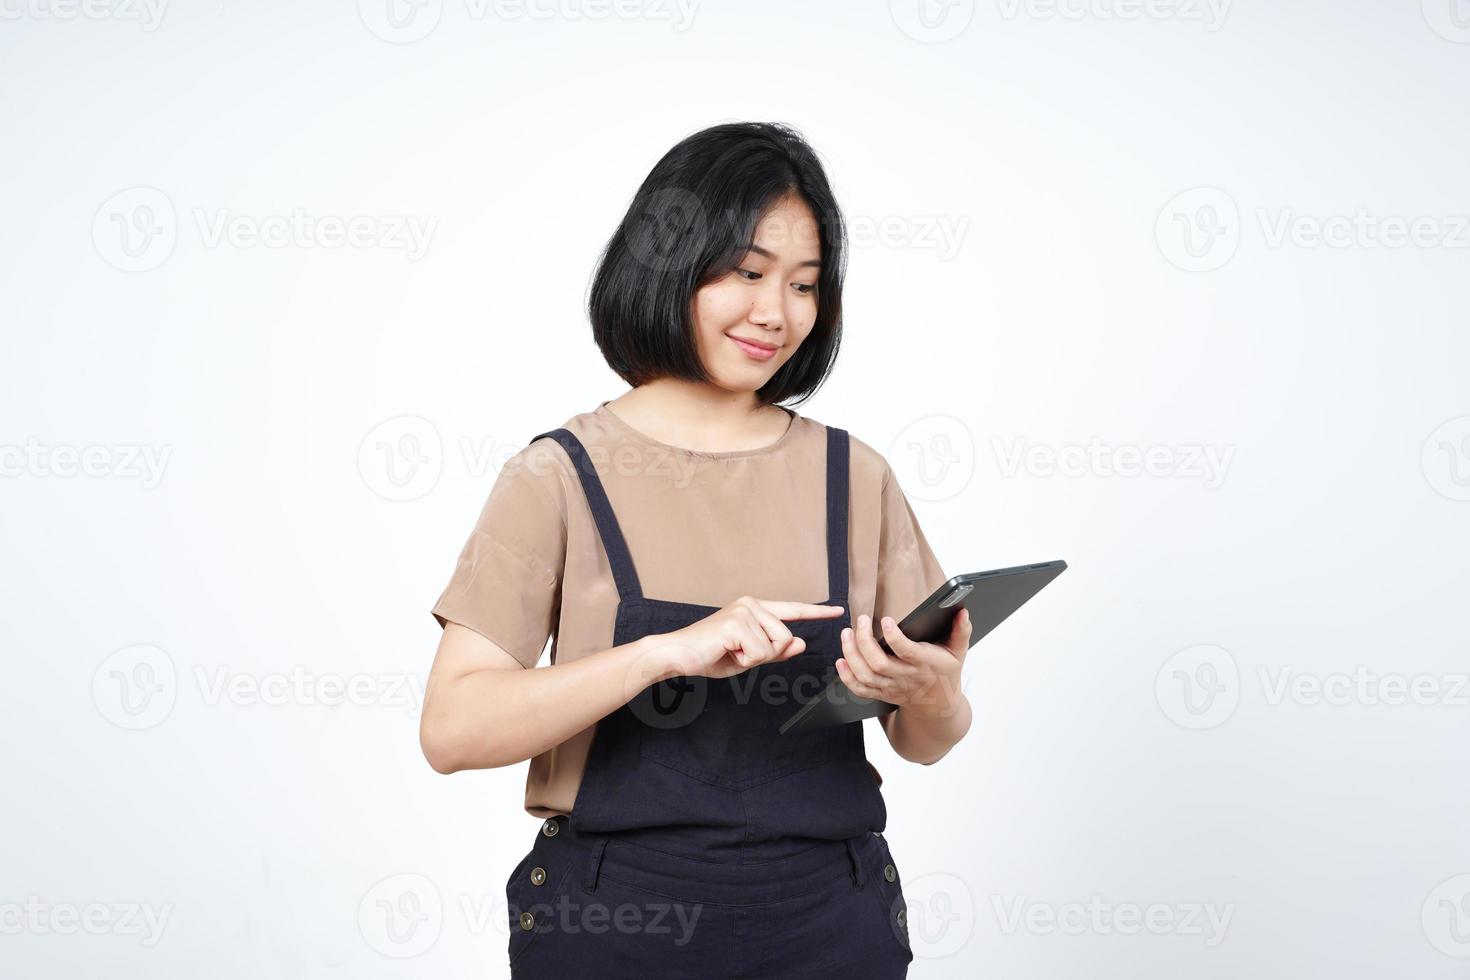 Holding and Using Tablet of Beautiful Asian Woman Isolated On White Background photo